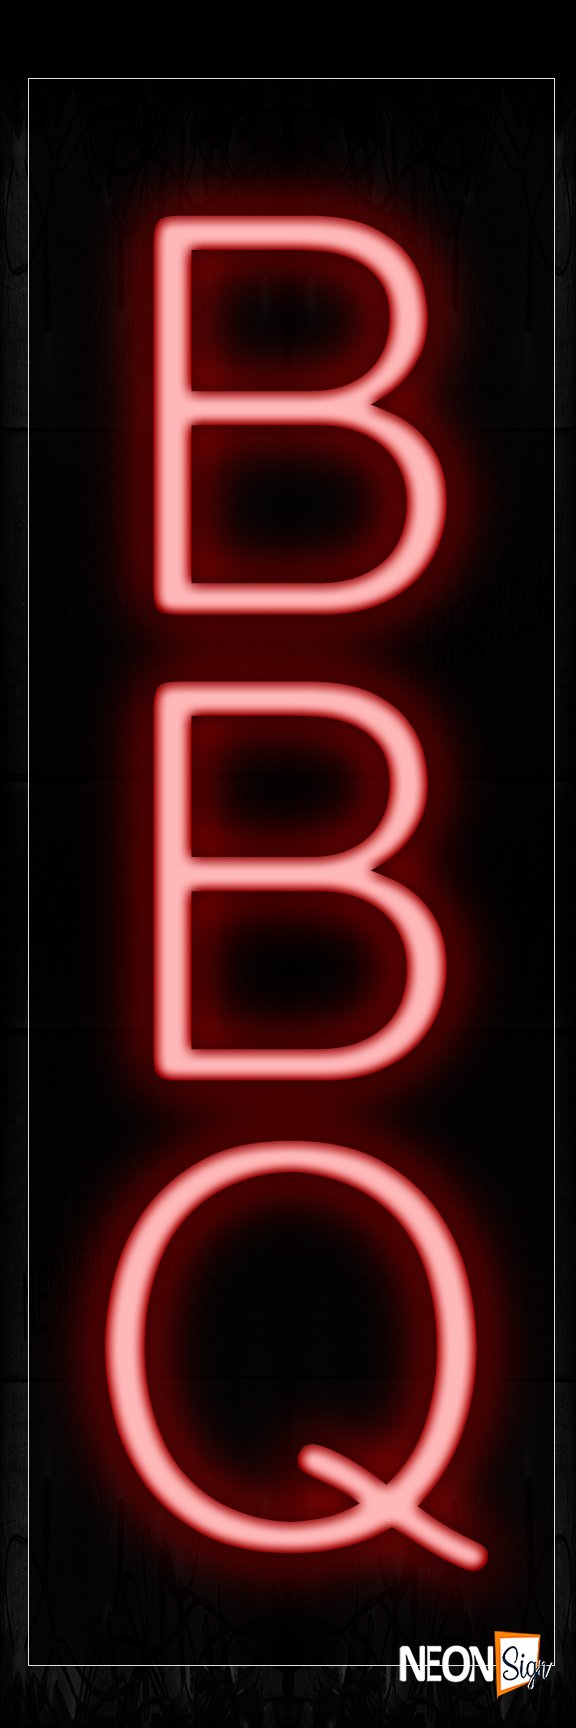 Image of 12201 Bbq (Vertical) Neon Signs_8x24 Black Backing